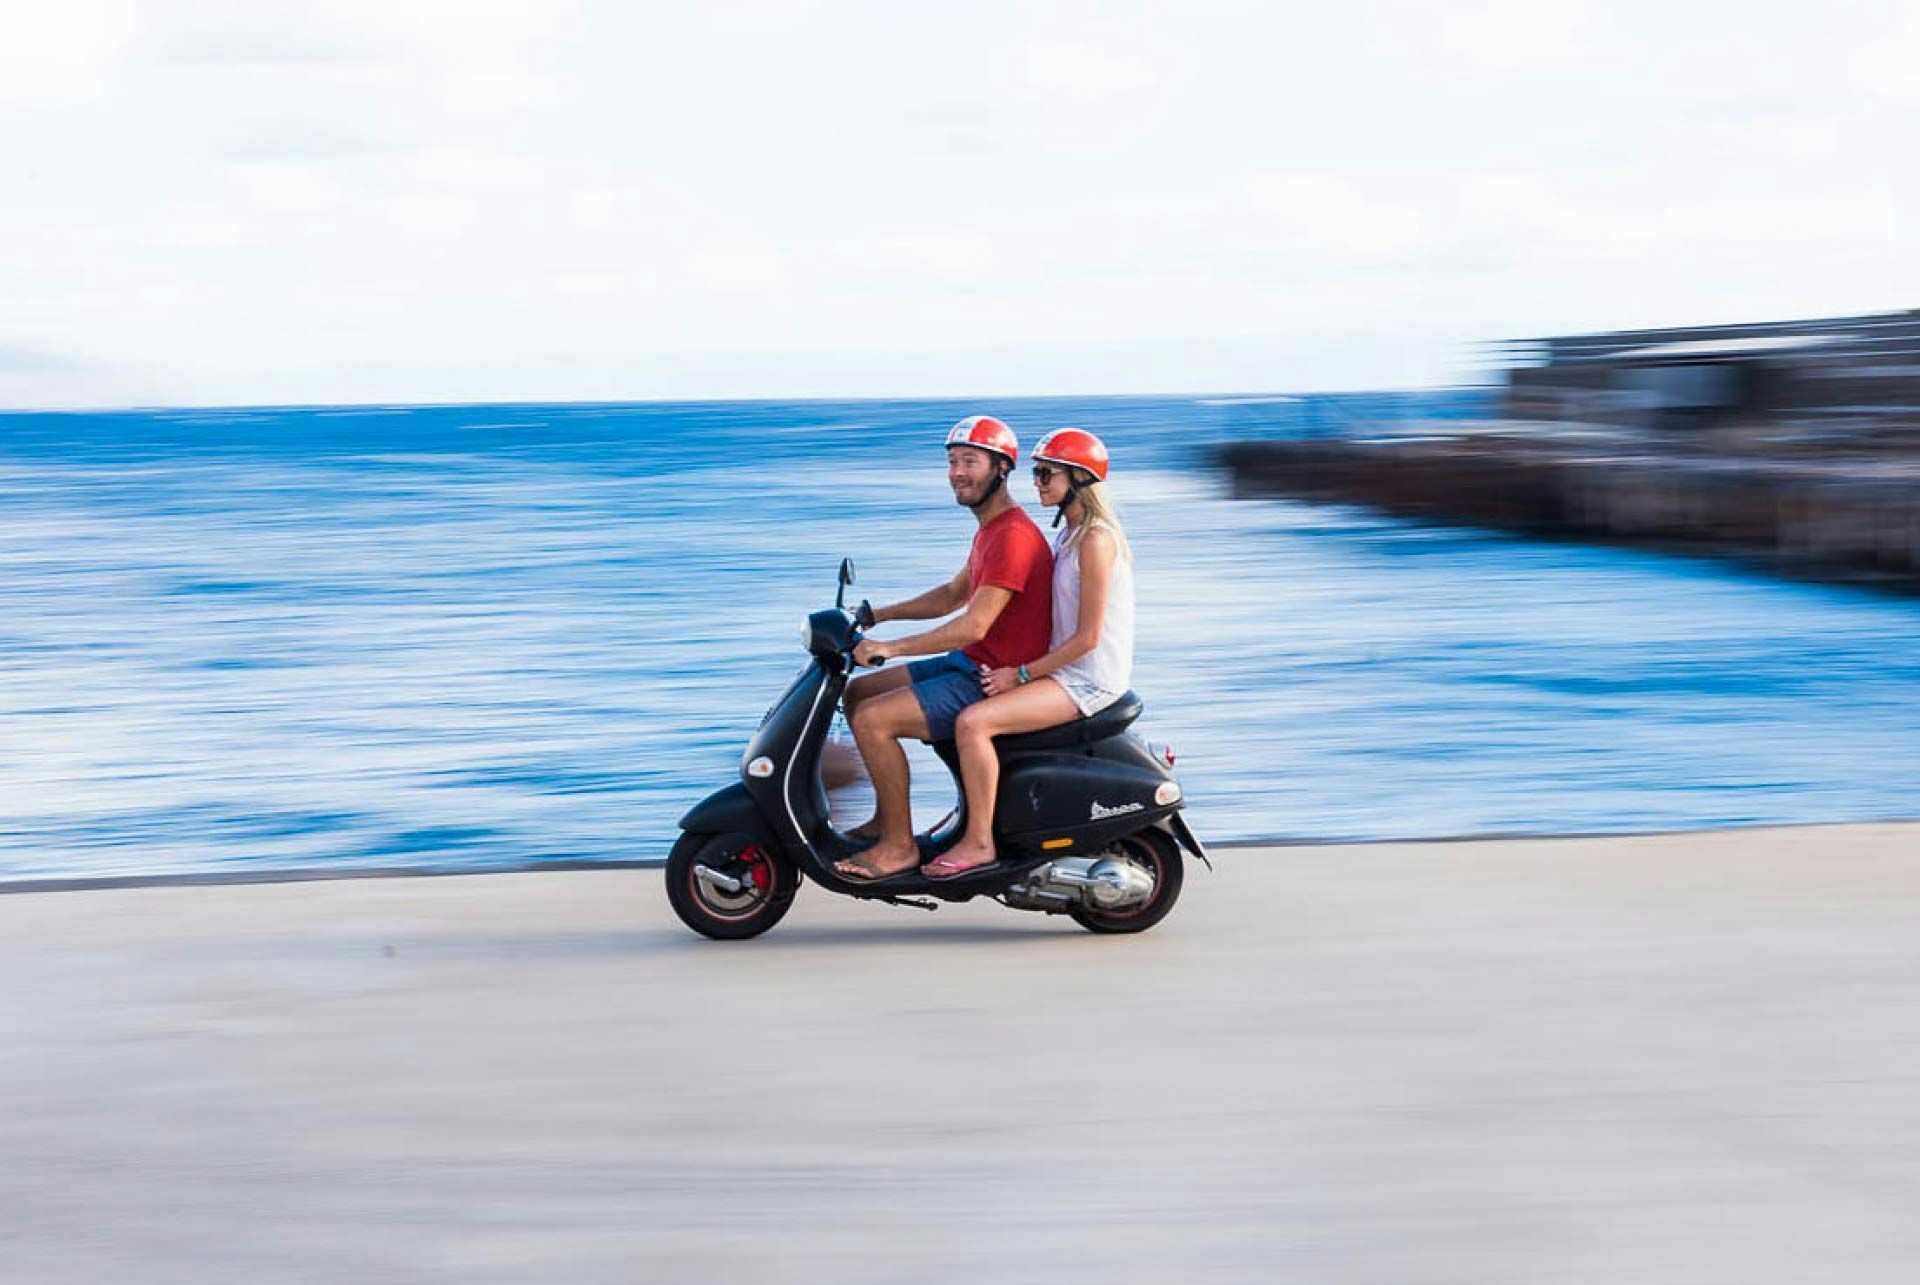 Couple riding on a scooter by the sea in Sicily